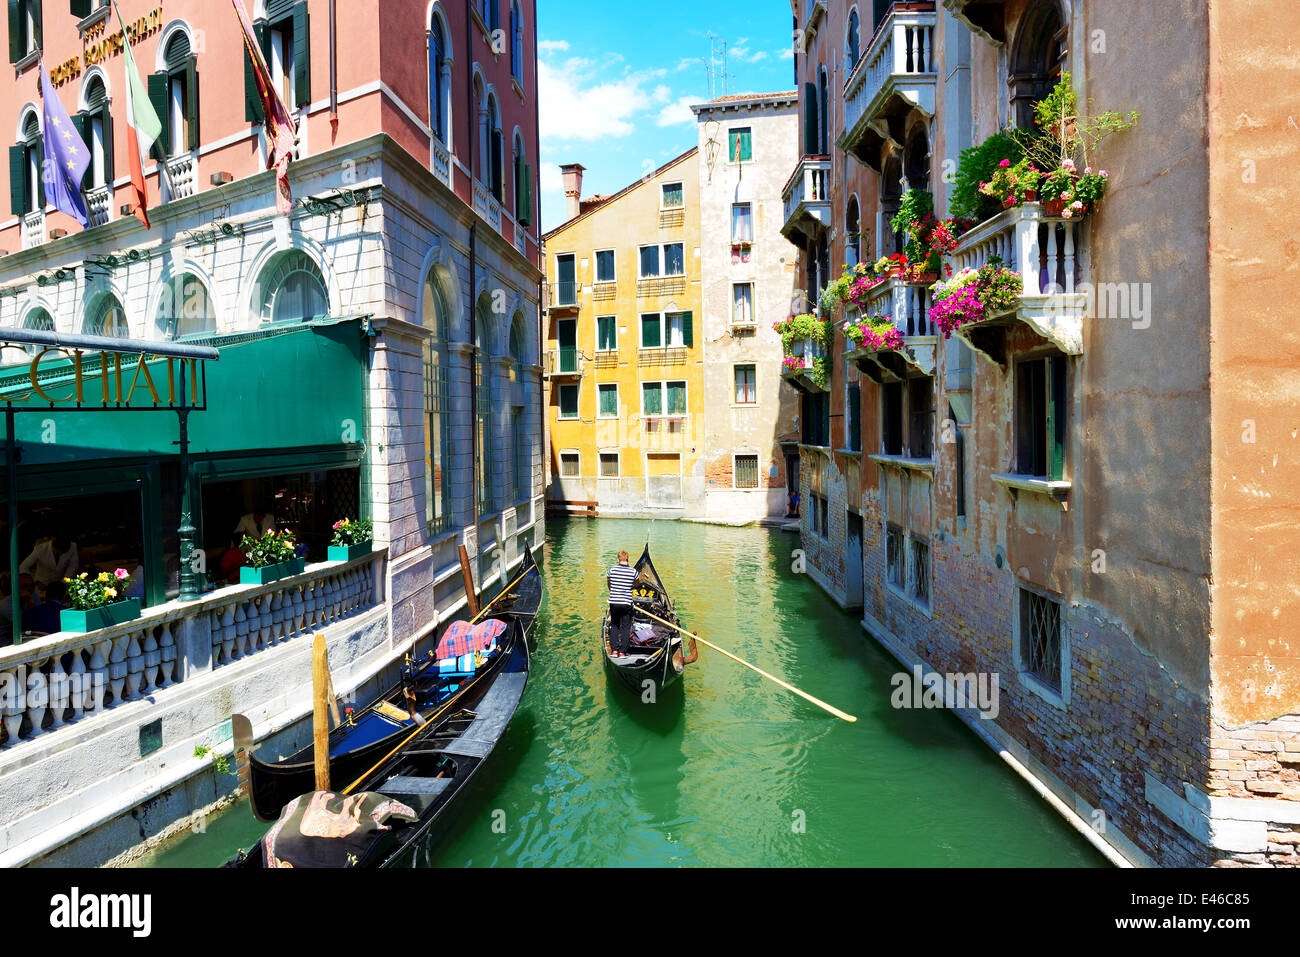 The gondola with tourists is on water channel, Venice, Italy Stock Photo